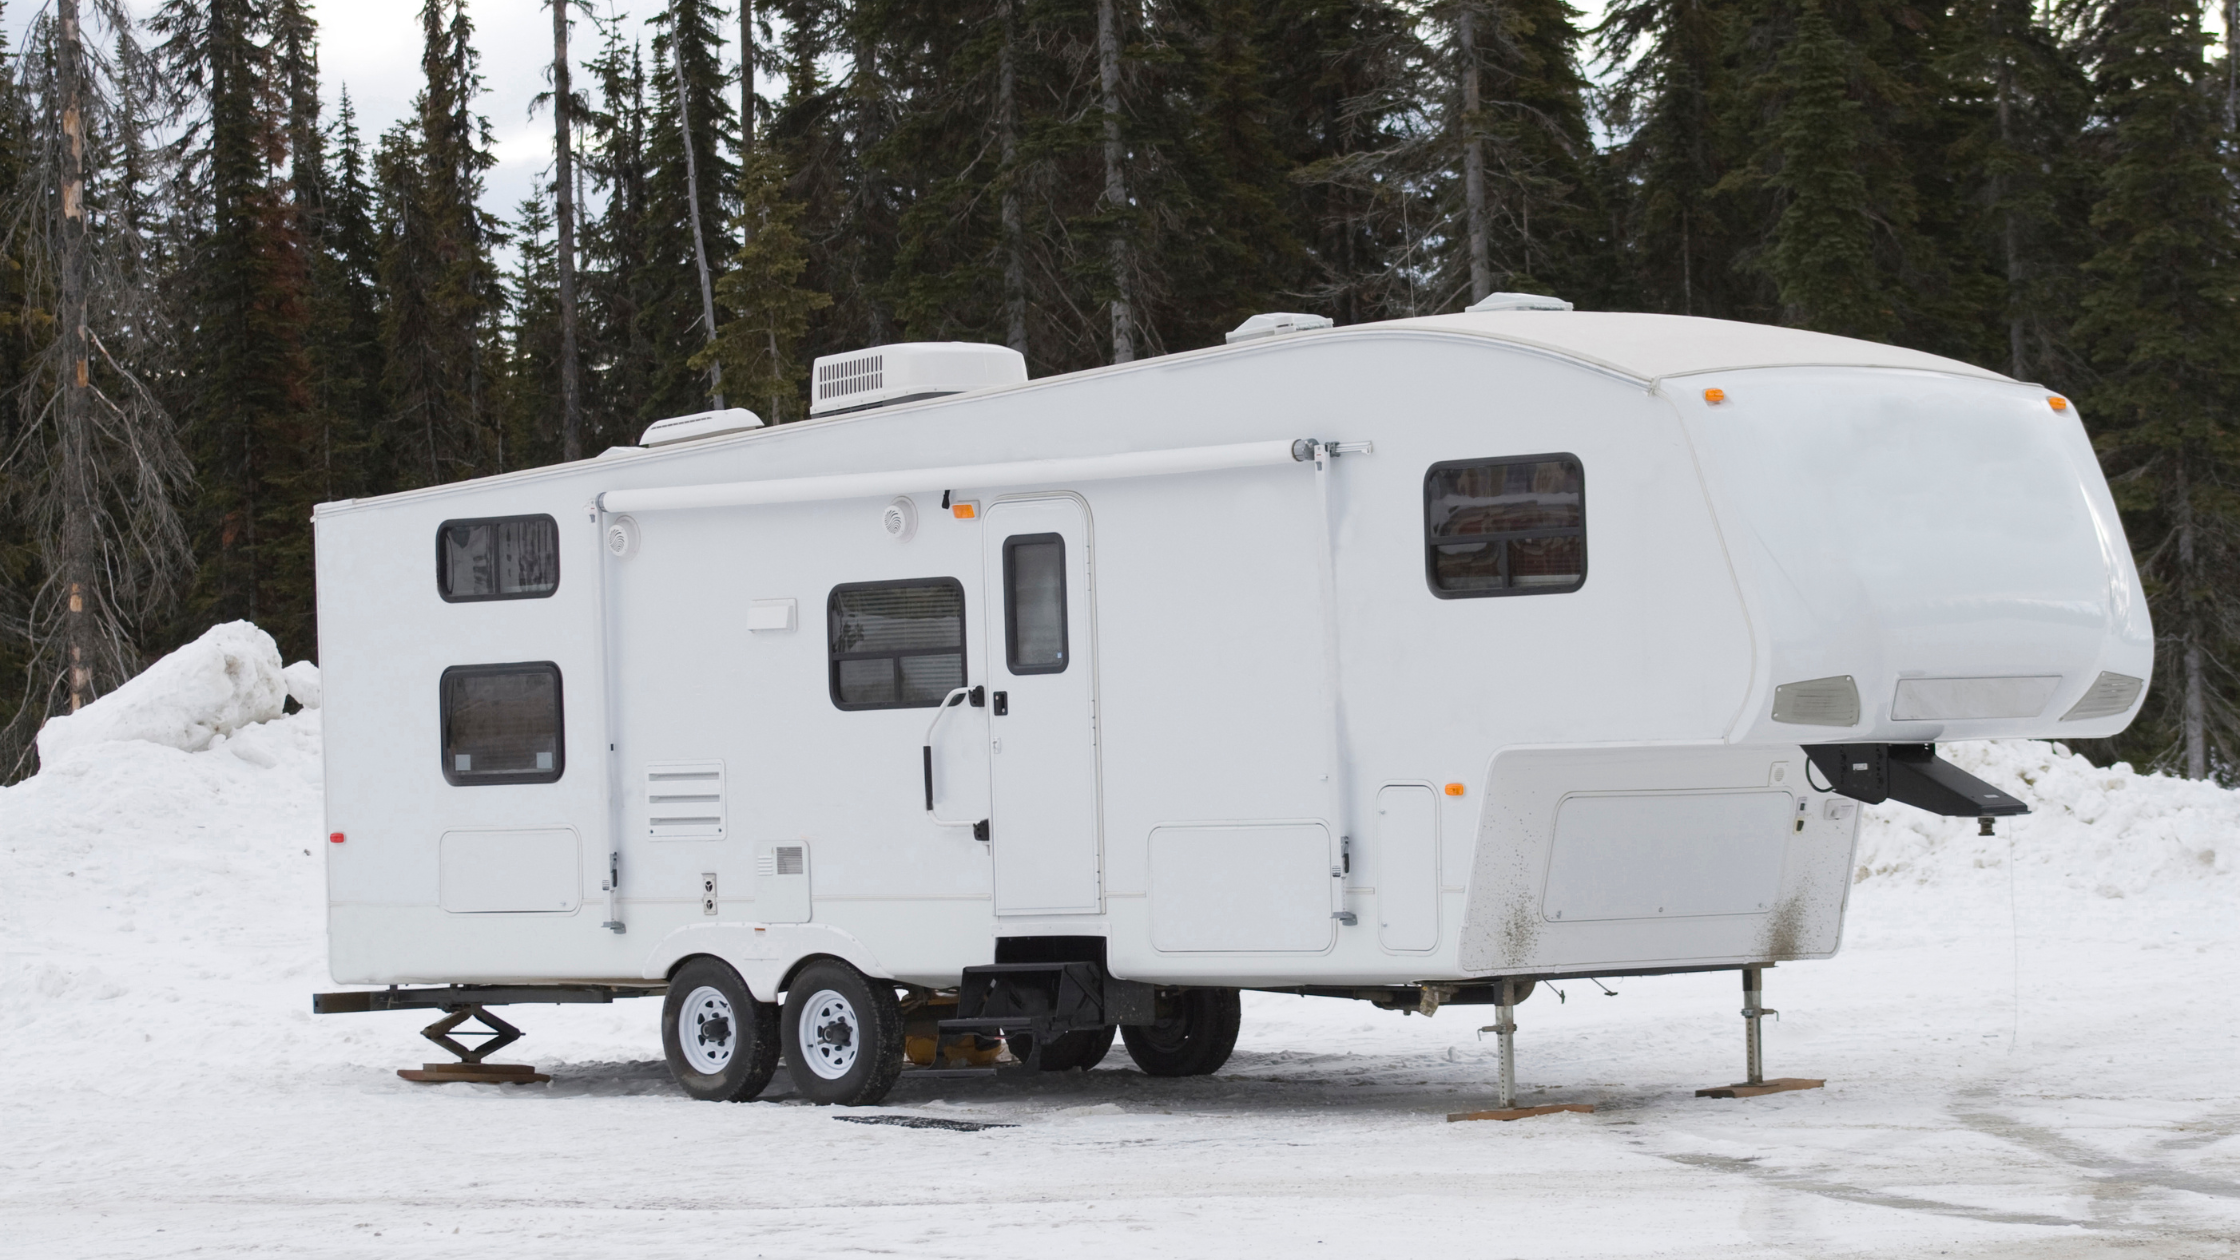 The Ultimate Guide to Winterizing Your RV